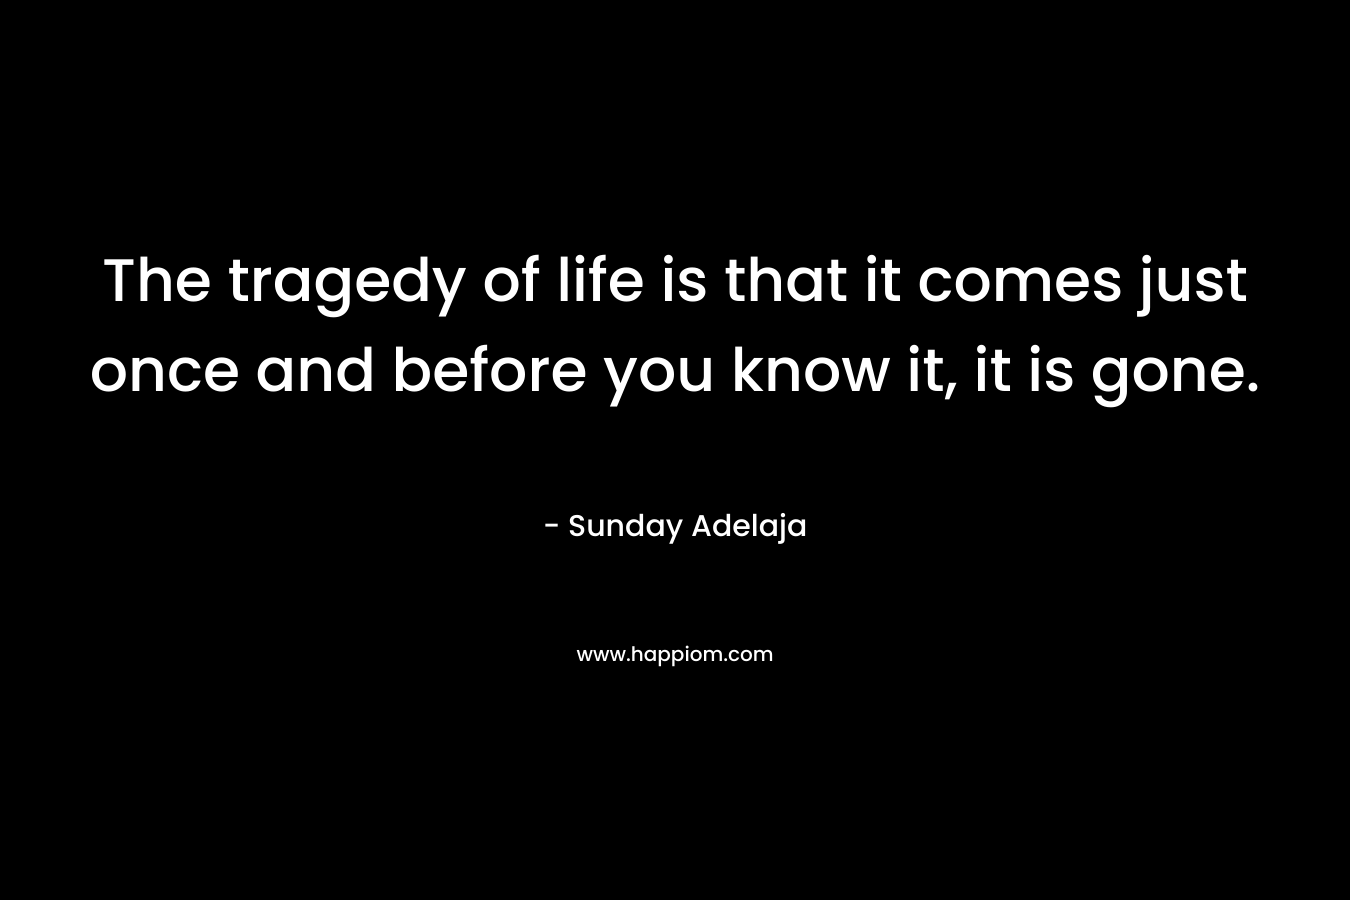 The tragedy of life is that it comes just once and before you know it, it is gone.